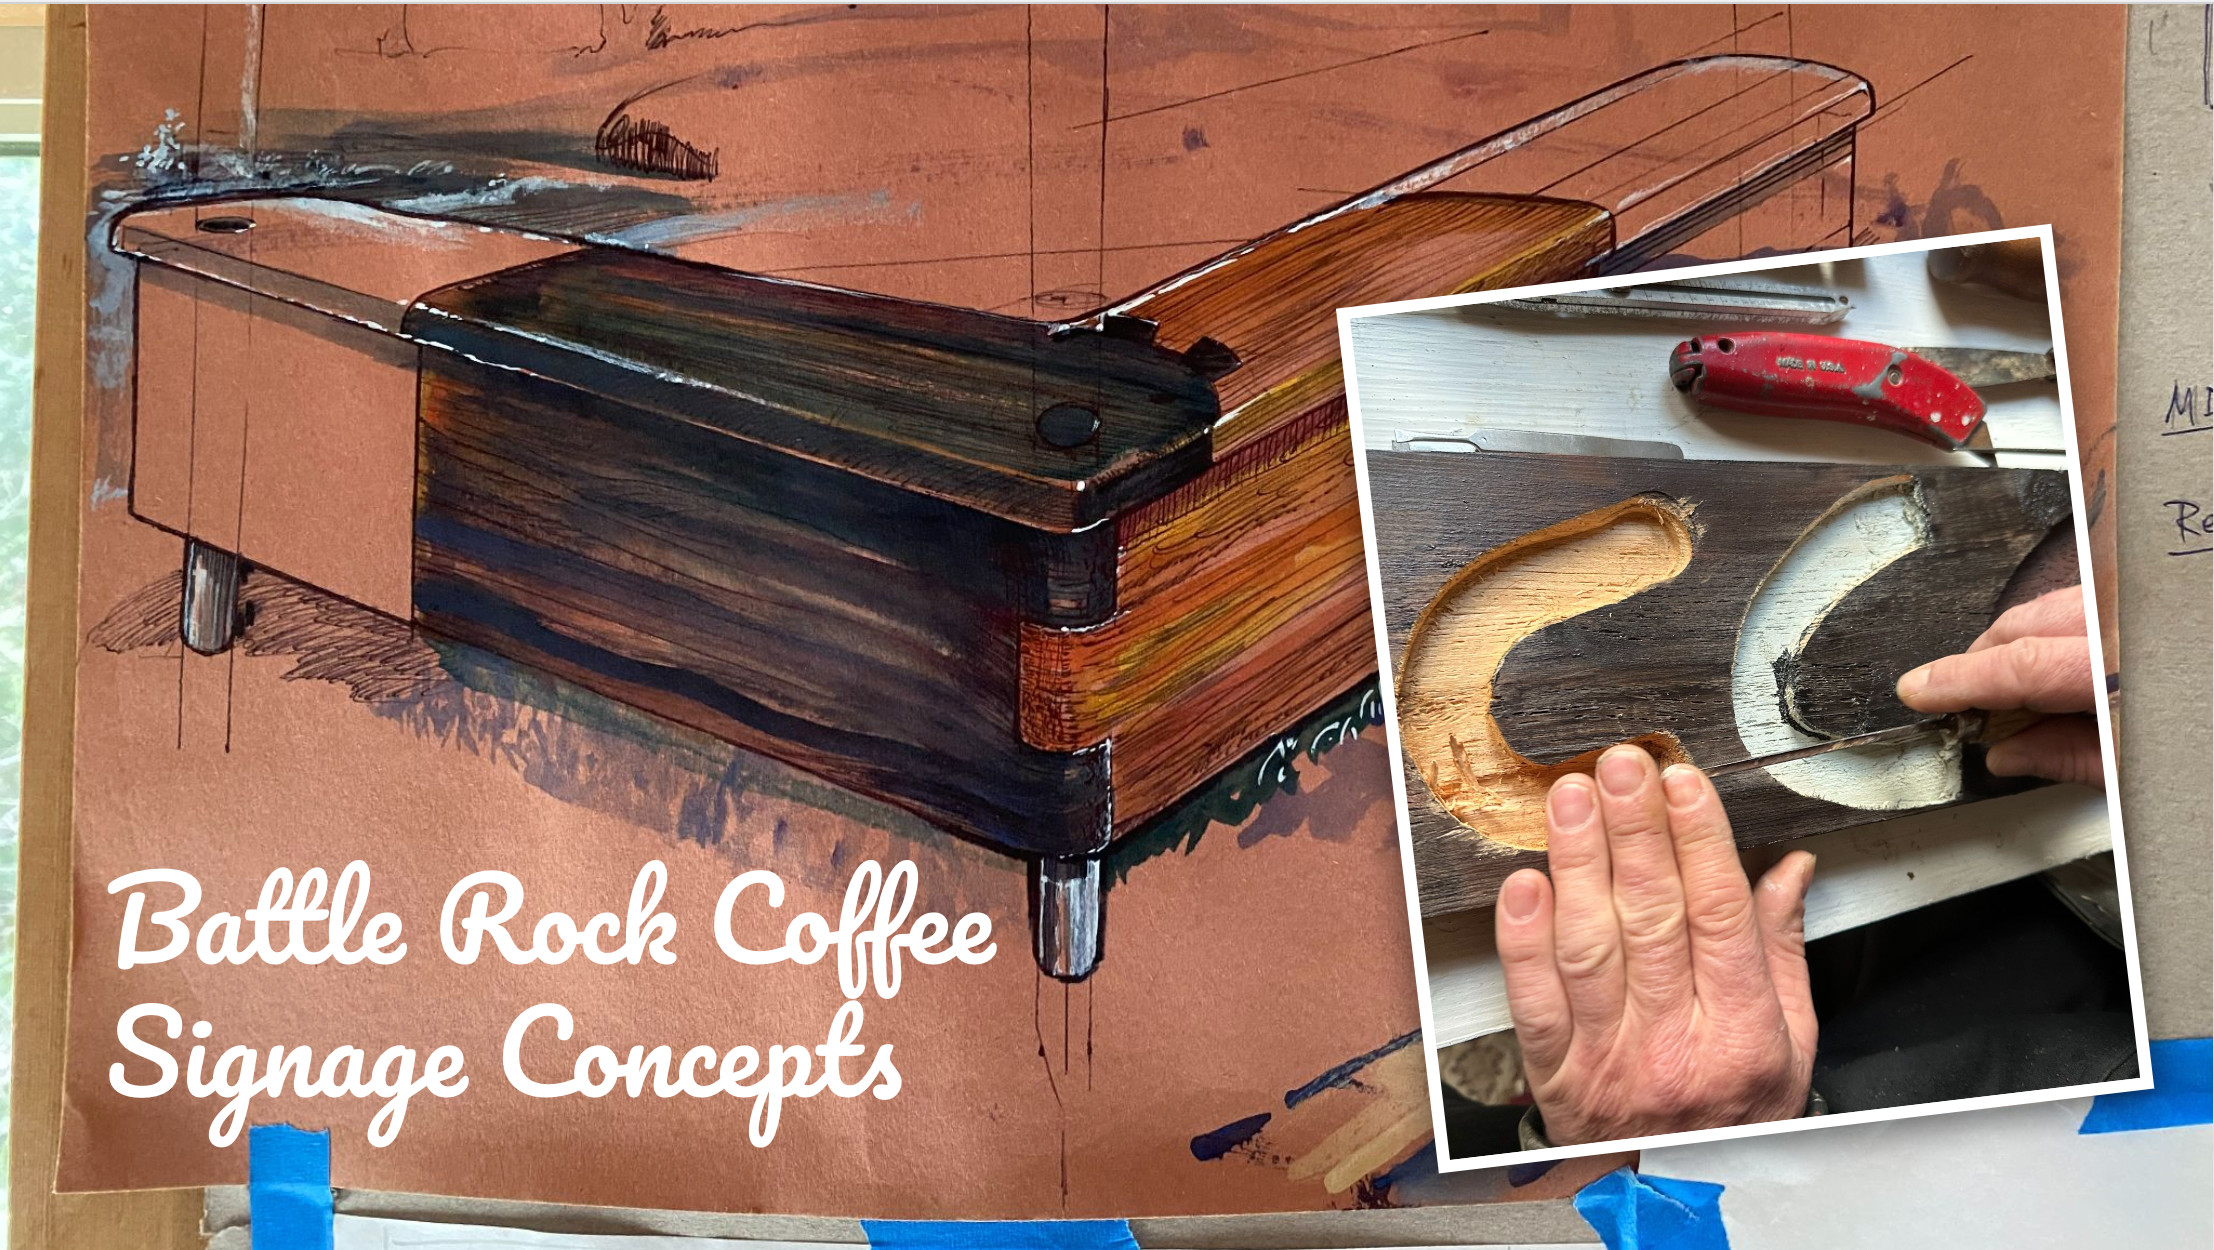 Battle Rock Coffee Signage Concepts